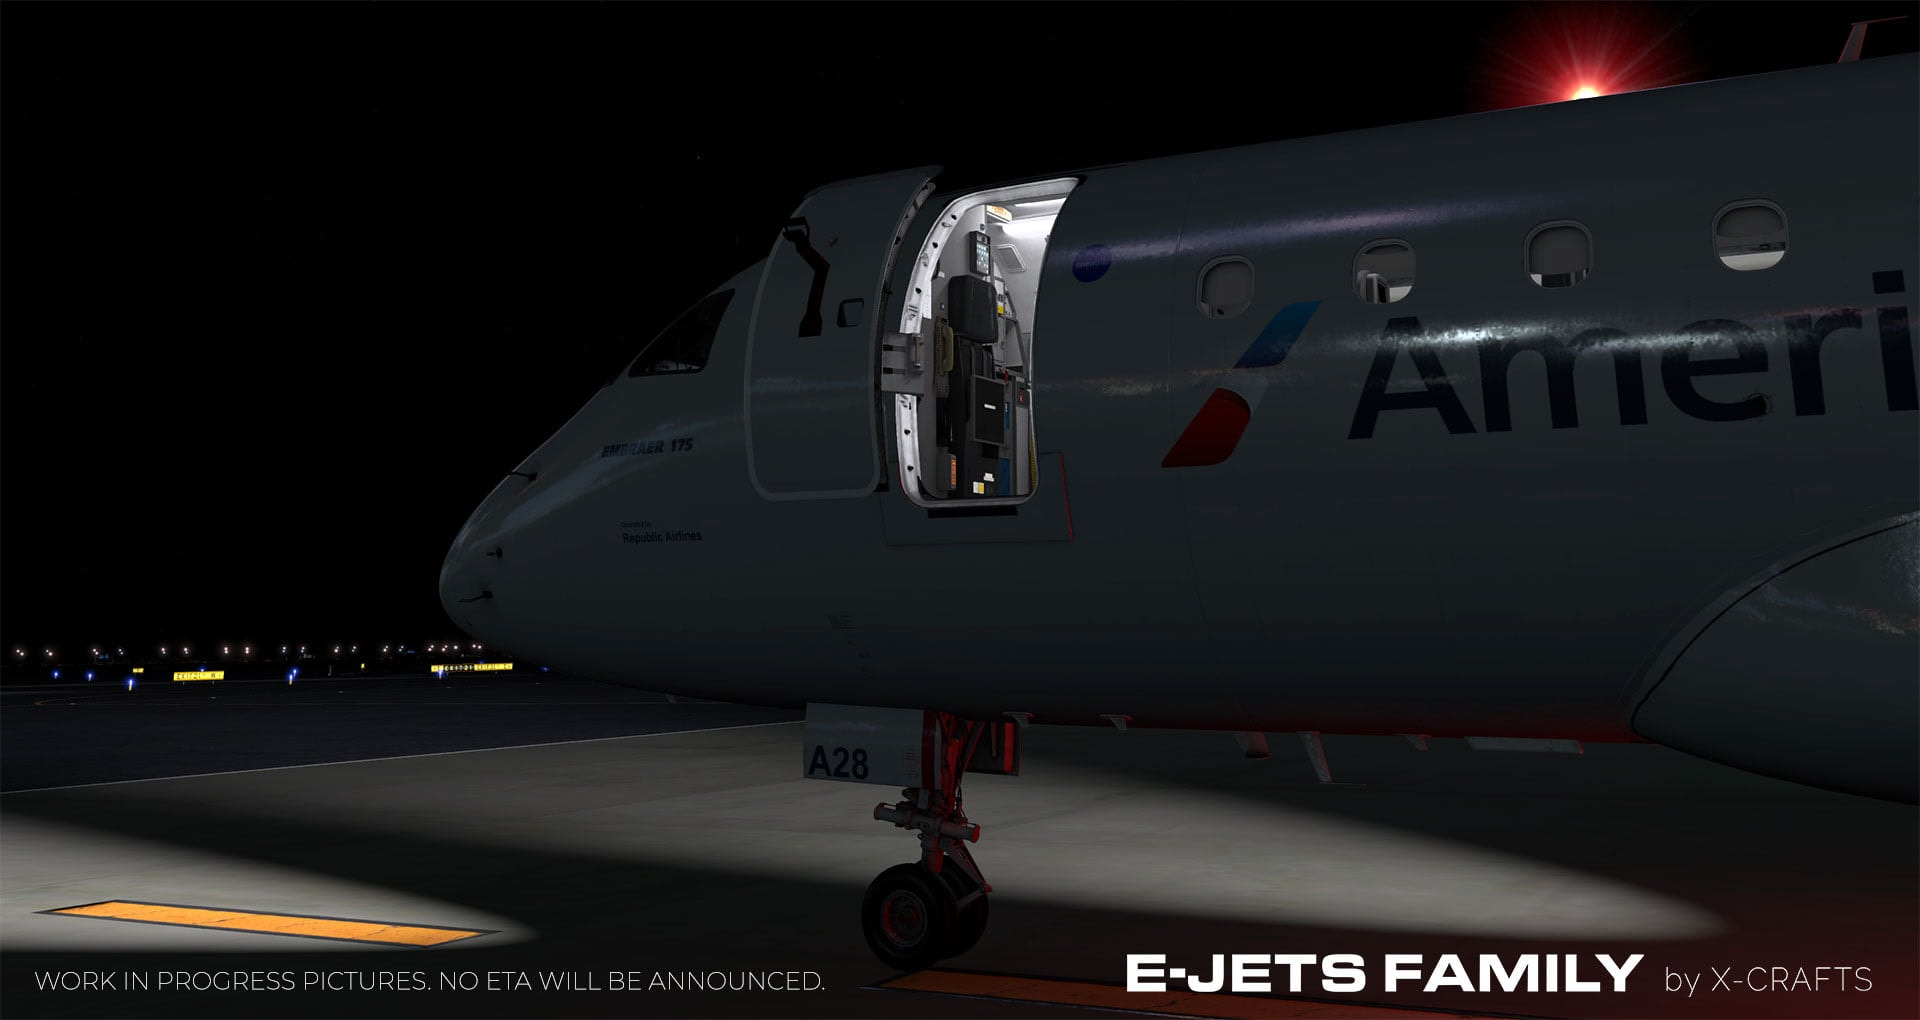 X-Crafts Further Previews and Updates on E-Jets Family - X-Crafts